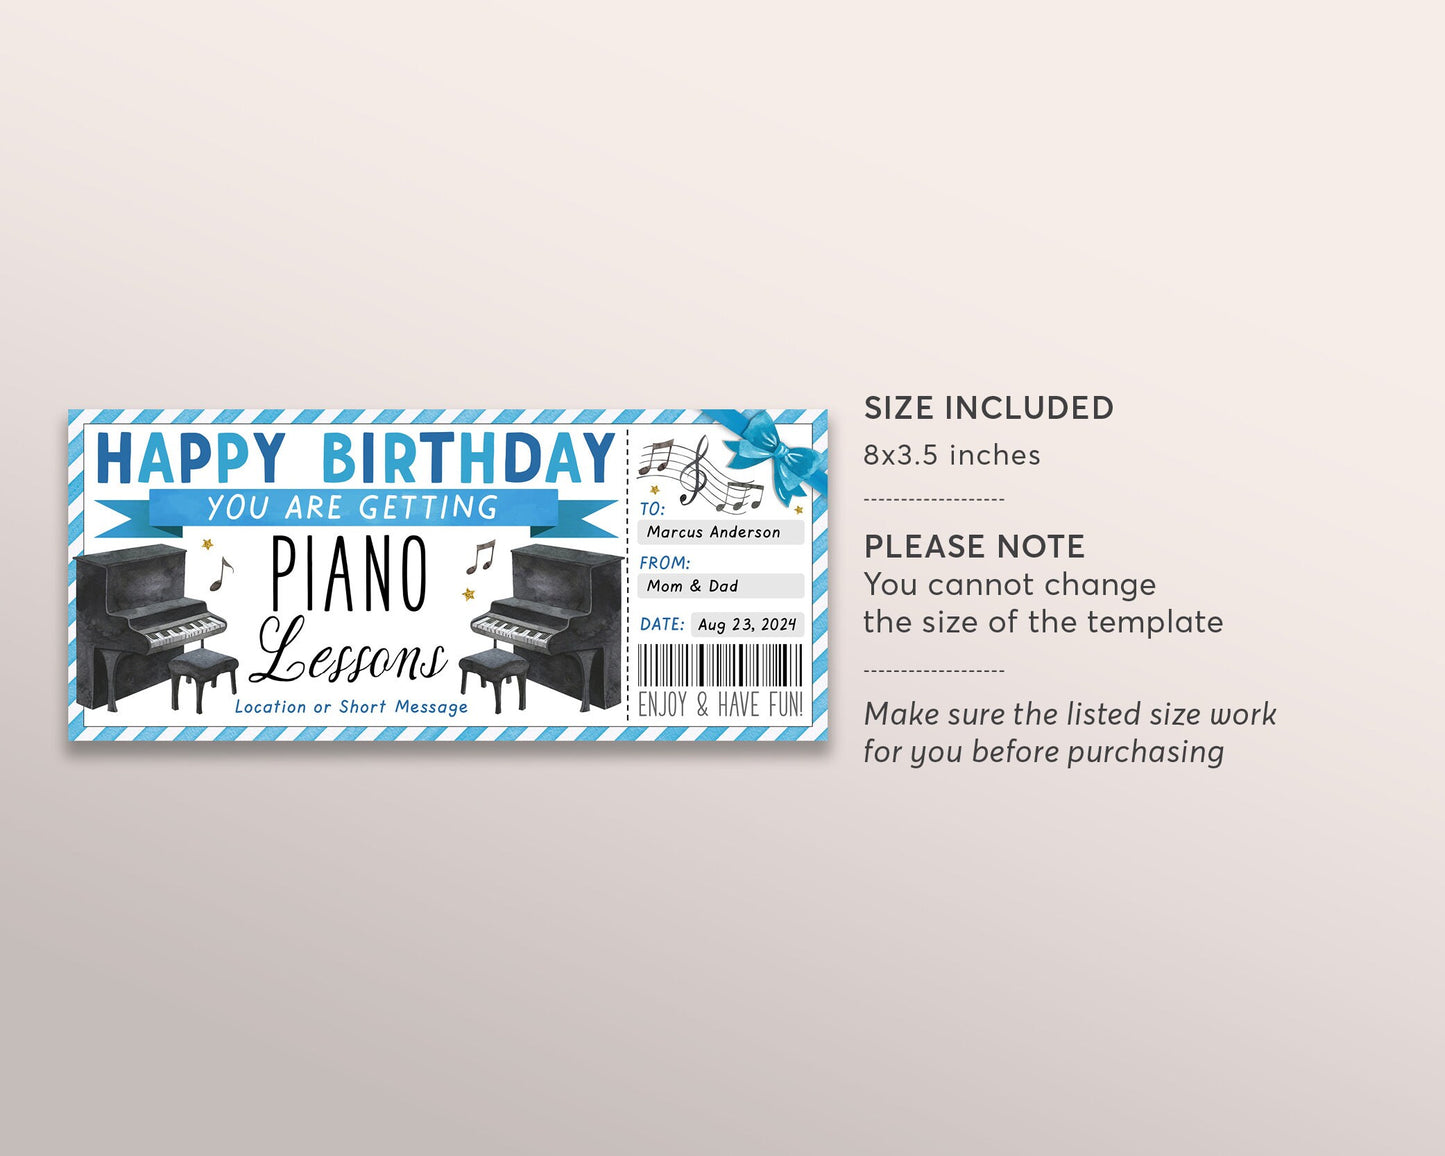 Piano Lessons Gift Certificate Editable Template, Birthday Surprise Keyboard Music Piano Class Gift Voucher Gift Reveal Coupon For Him